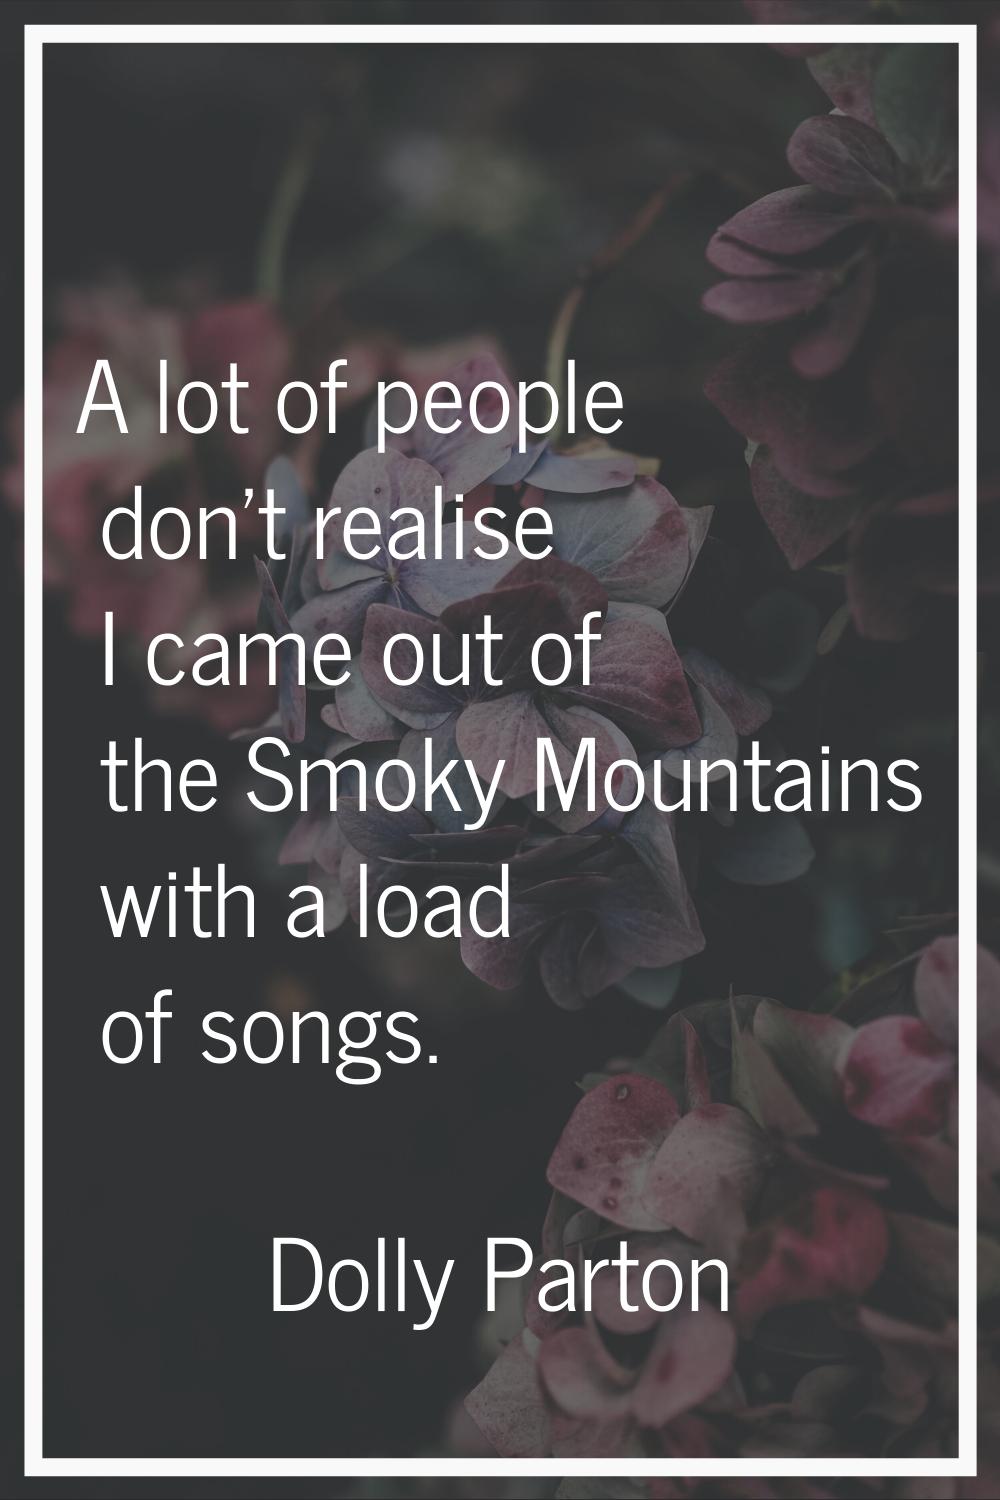 A lot of people don't realise I came out of the Smoky Mountains with a load of songs.